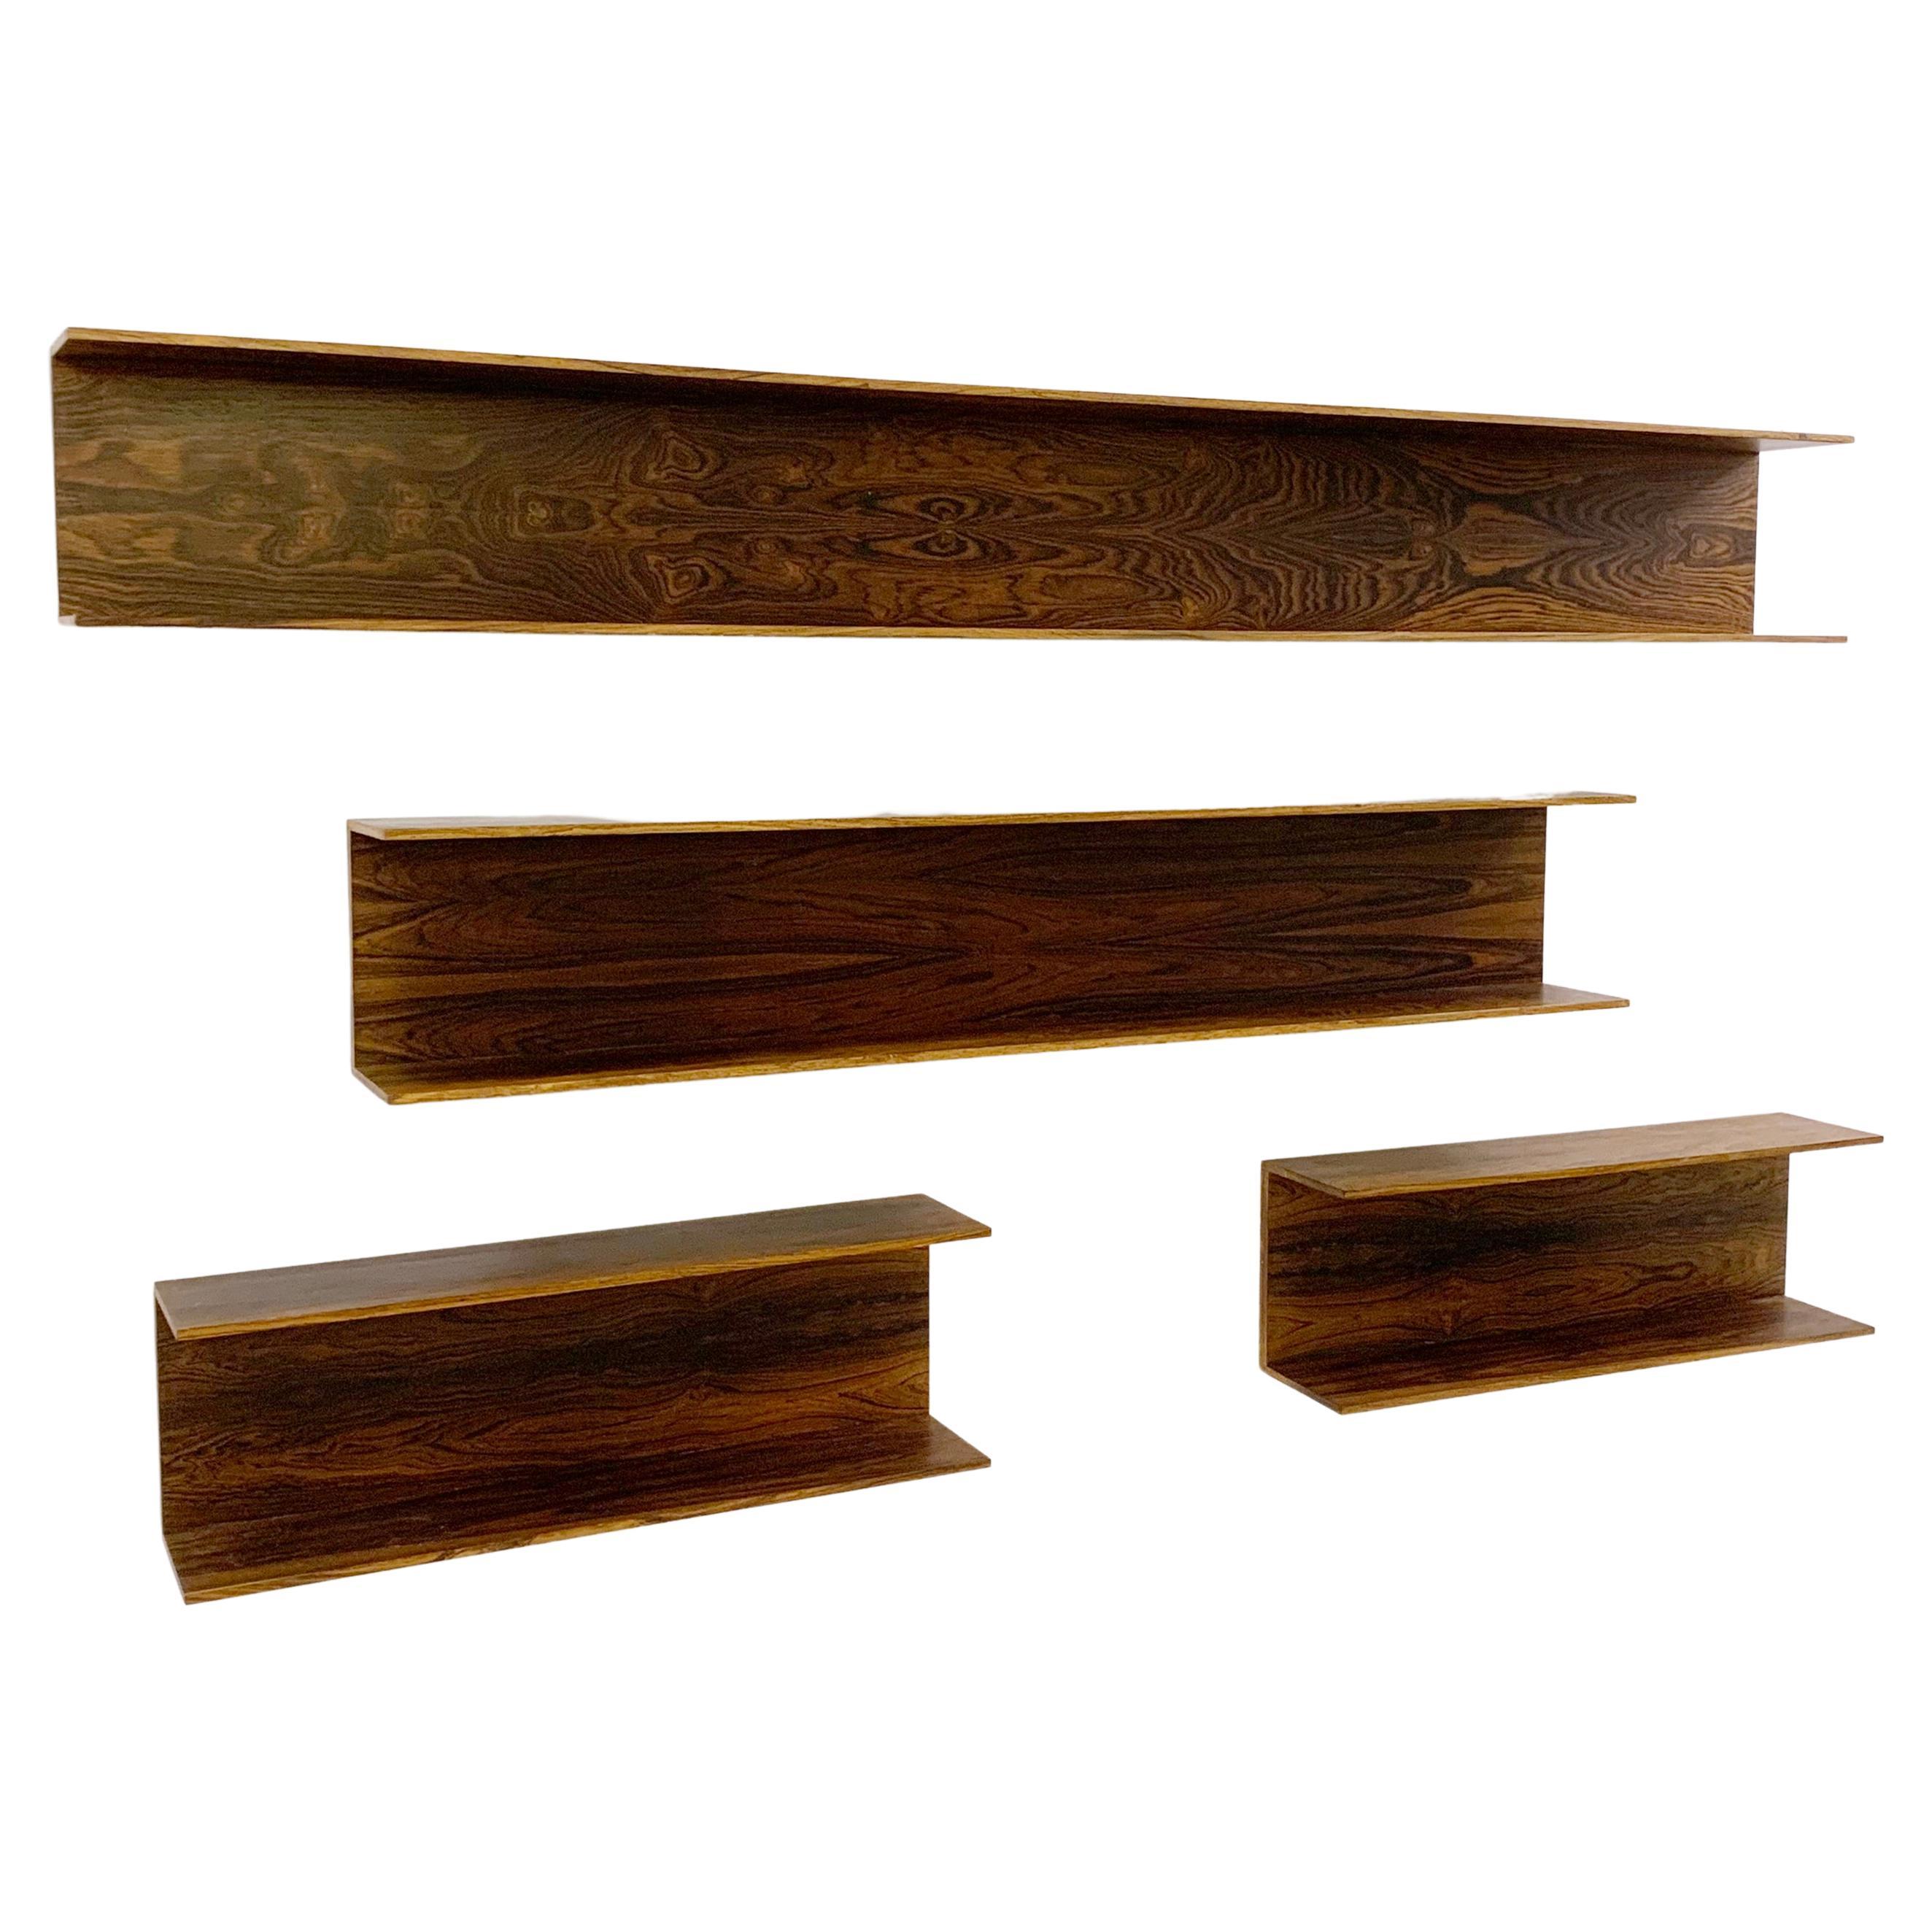 Set of 4 Mid-Century Wooden Shelves, Italy 1960s For Sale